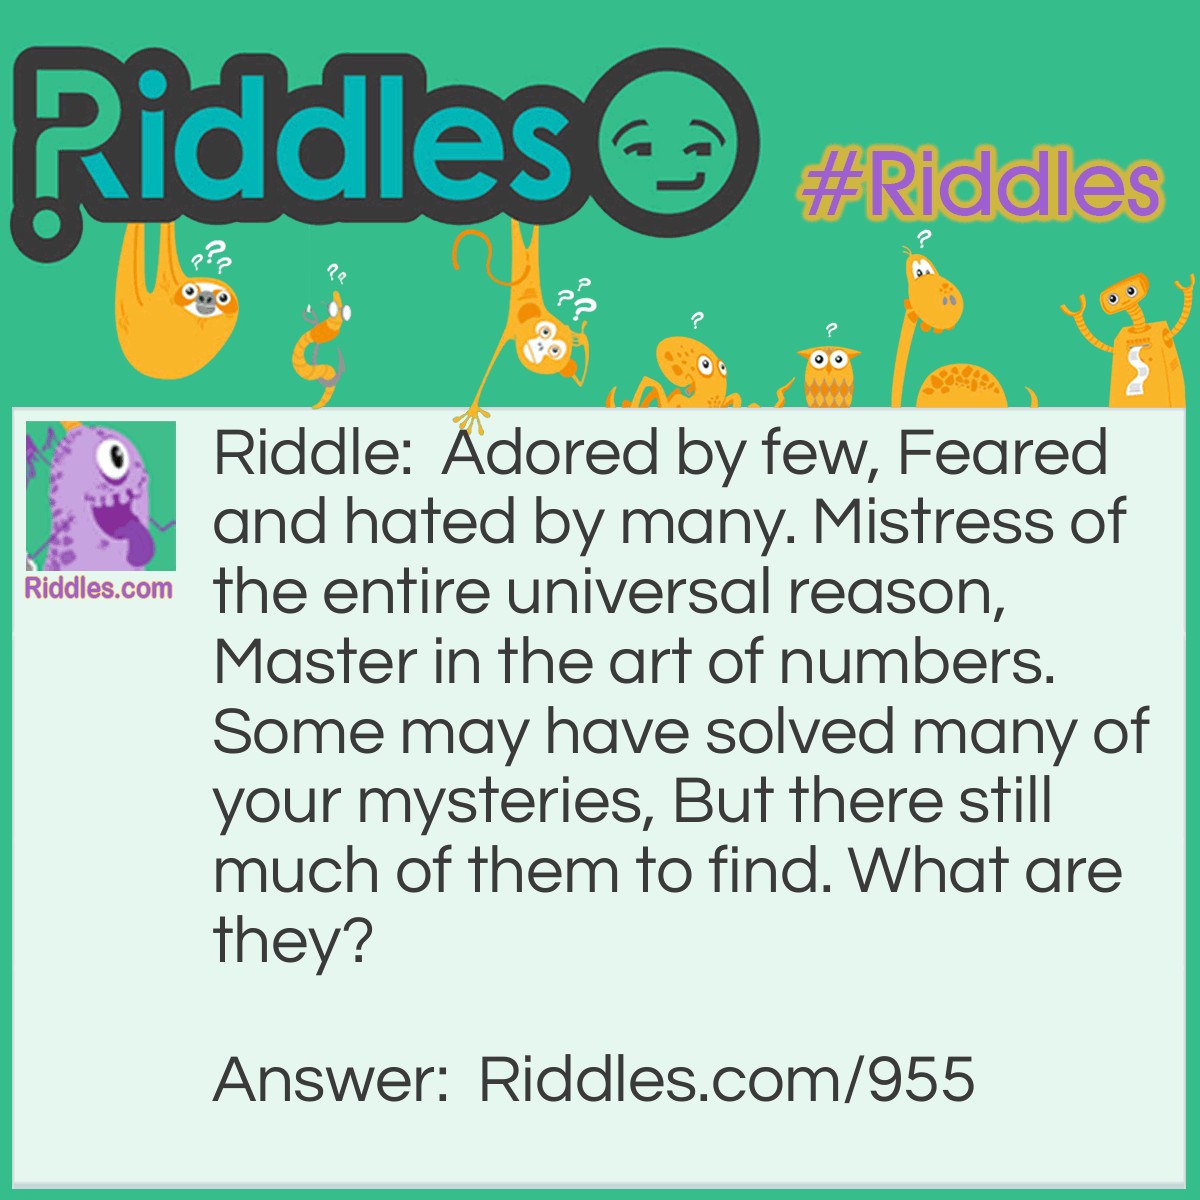 Riddle: Adored by few, Feared and hated by many. Mistress of the entire universal reason, Master in the art of numbers. Some may have solved many of your mysteries, But there still much of them to find. What are they? Answer: Mathematics.